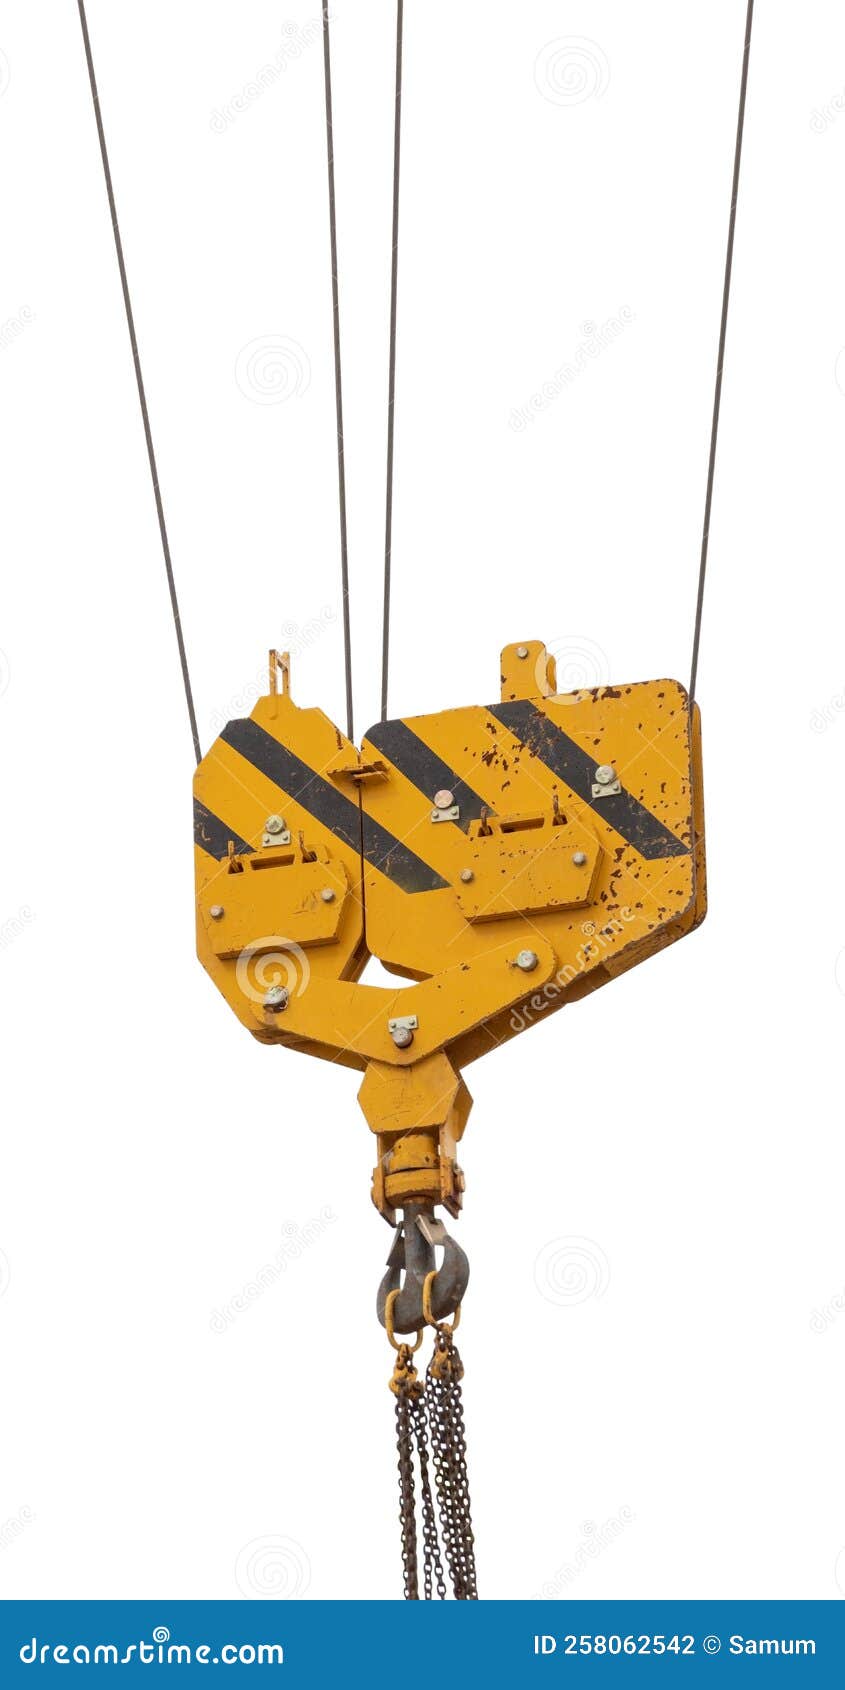 https://thumbs.dreamstime.com/z/crane-hook-hanging-steel-ropes-isolated-white-background-258062542.jpg